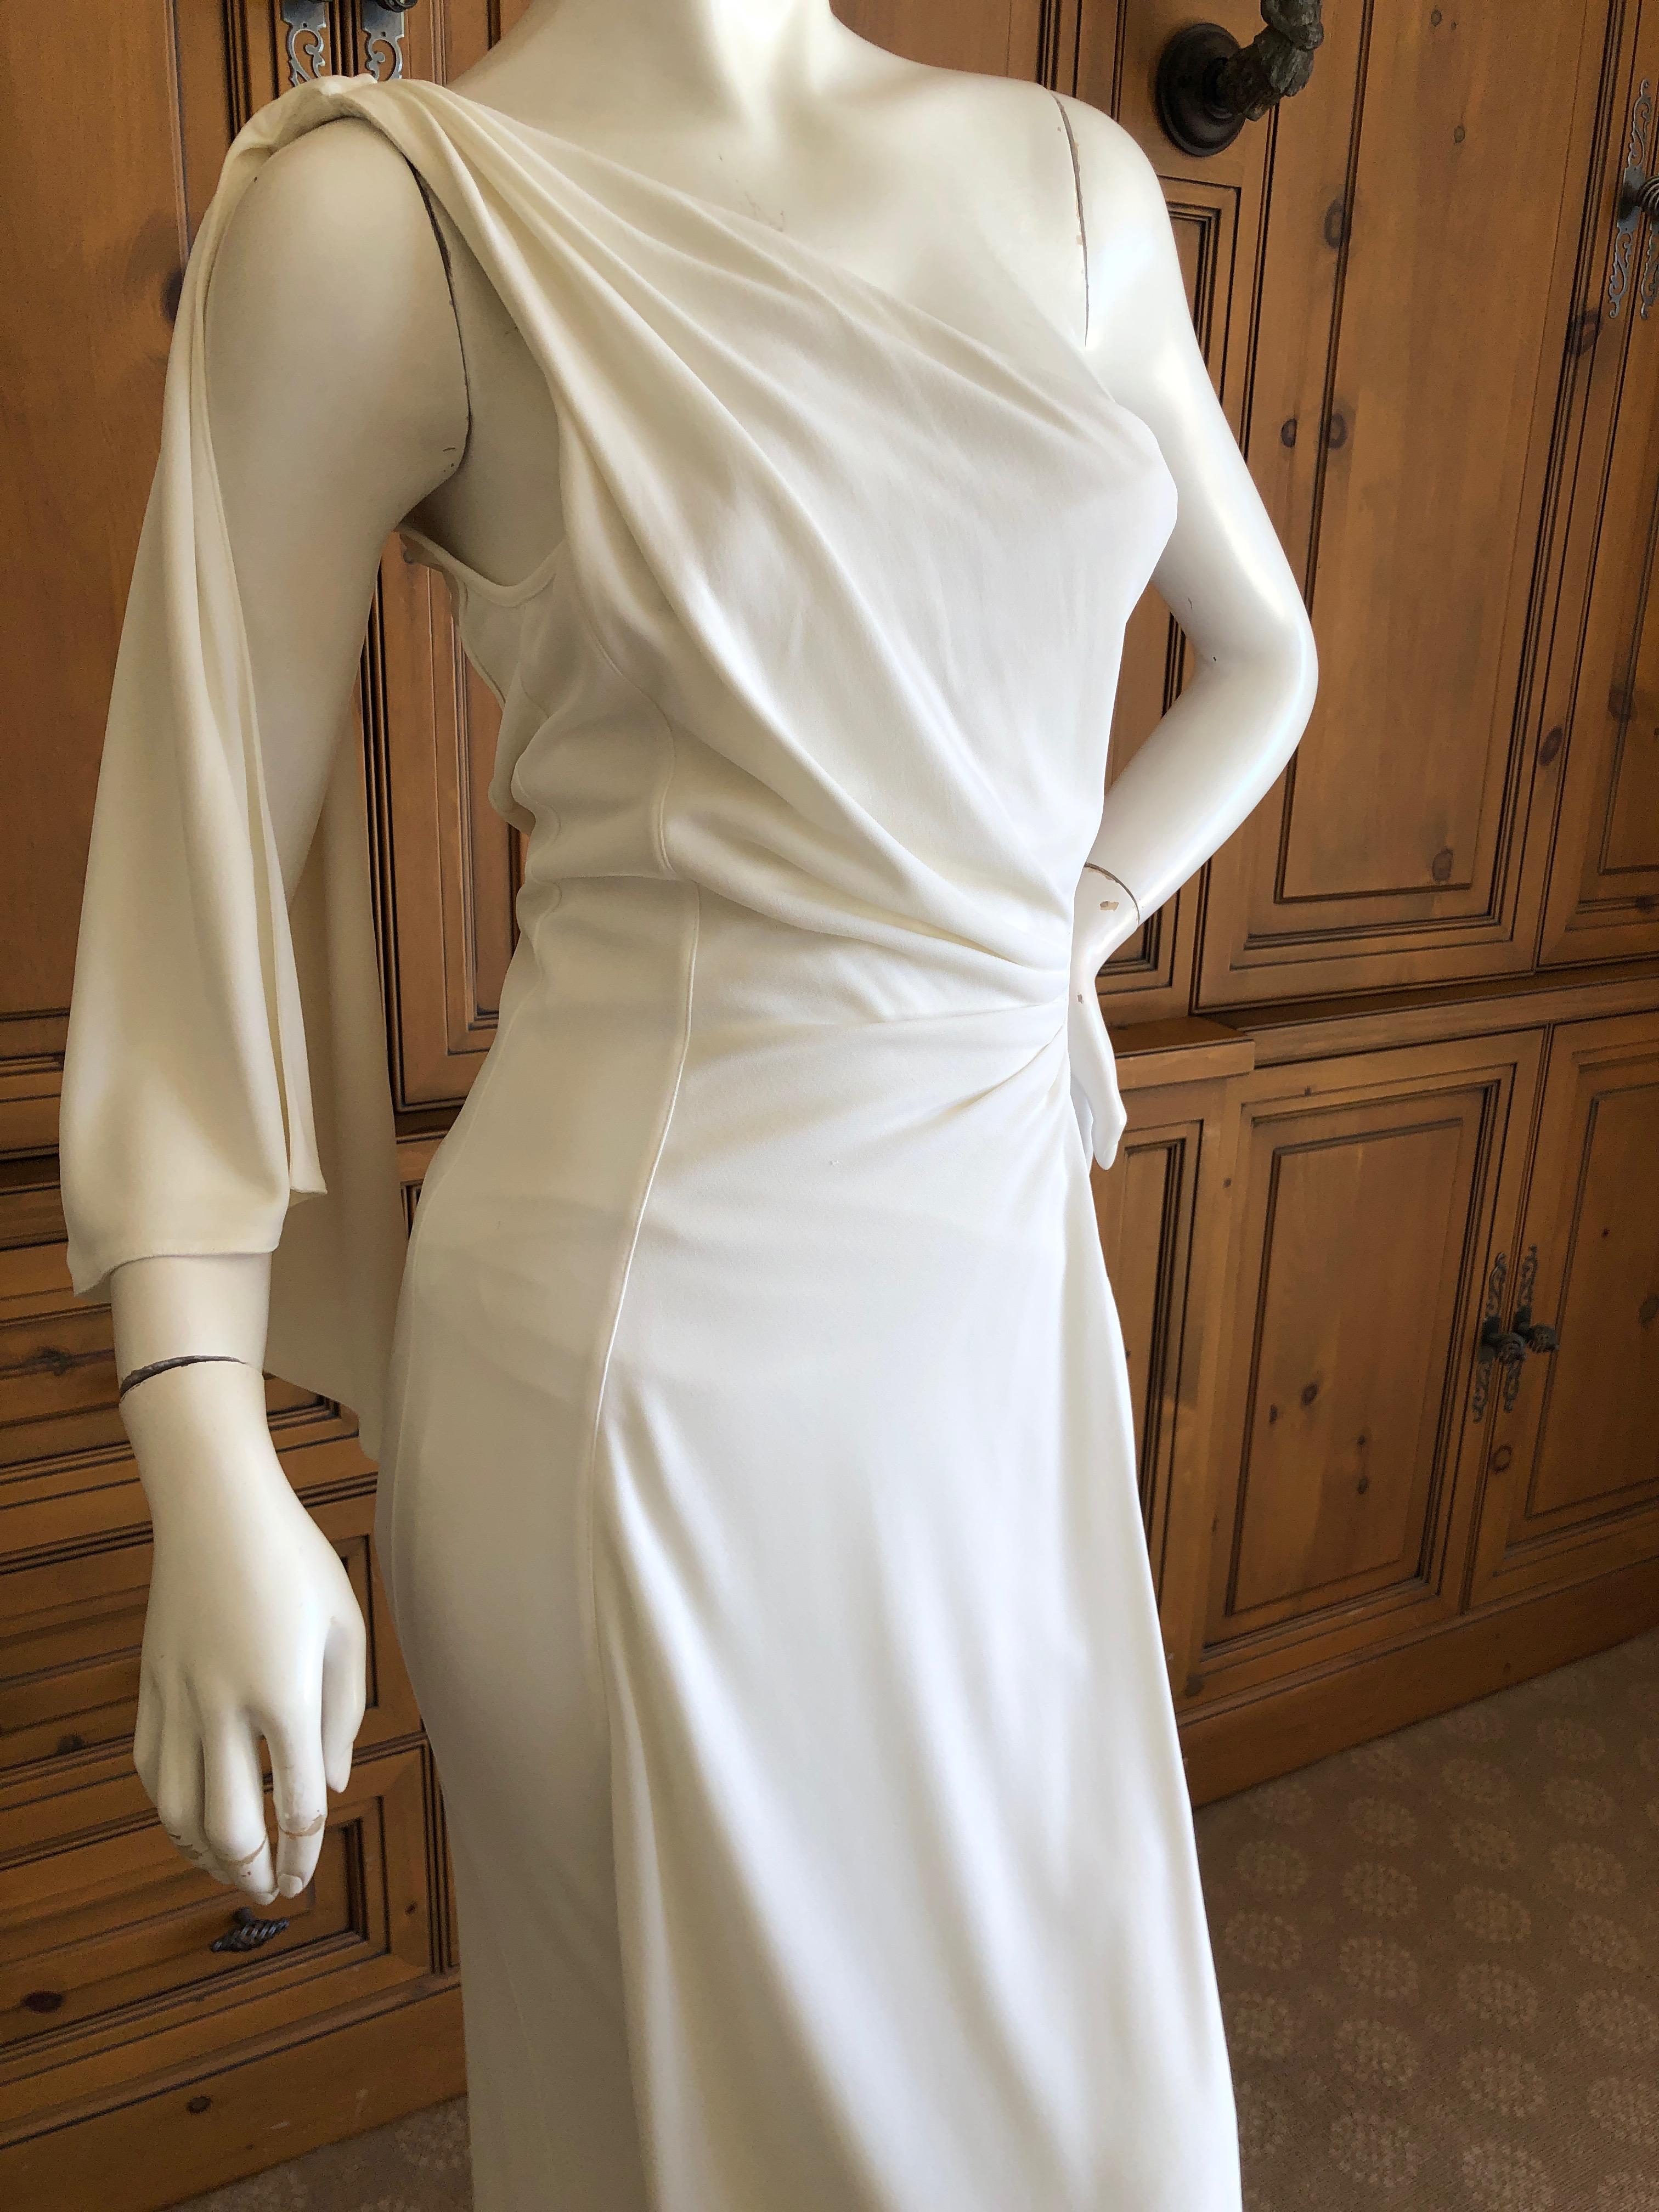 Thierry Mugler Paris Vintage Eighties Ivory White One Shoulder Goddess Dress In Good Condition For Sale In Cloverdale, CA